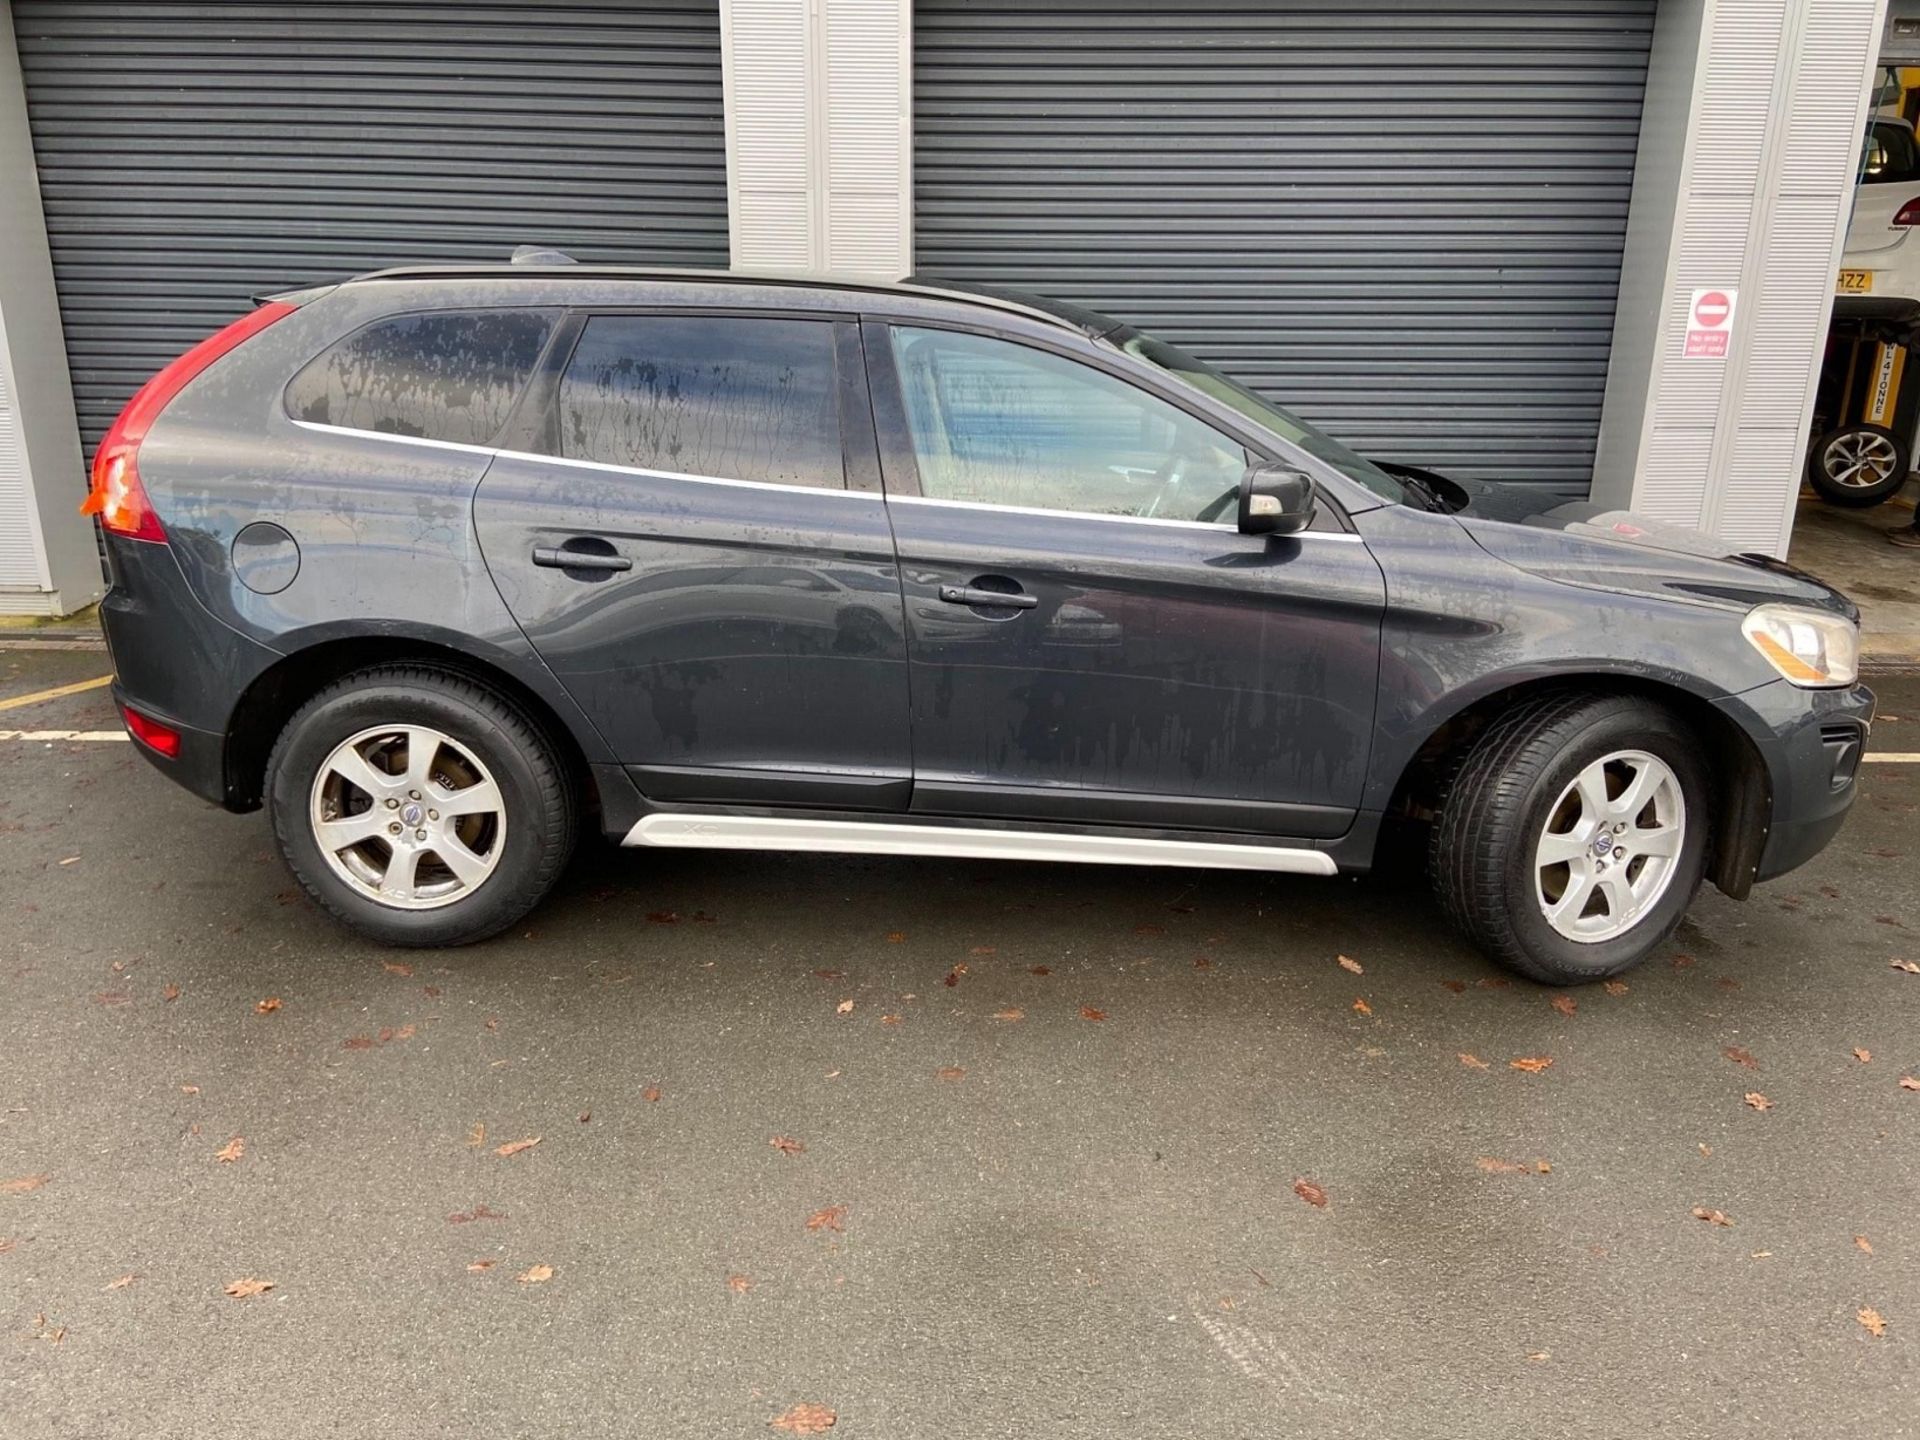 2009 Volvo XC60 2.4 D5 SE SUV 5dr 4x4 - CL505 - NO VAT ON THE HAMMER - Locatio - Image 17 of 17